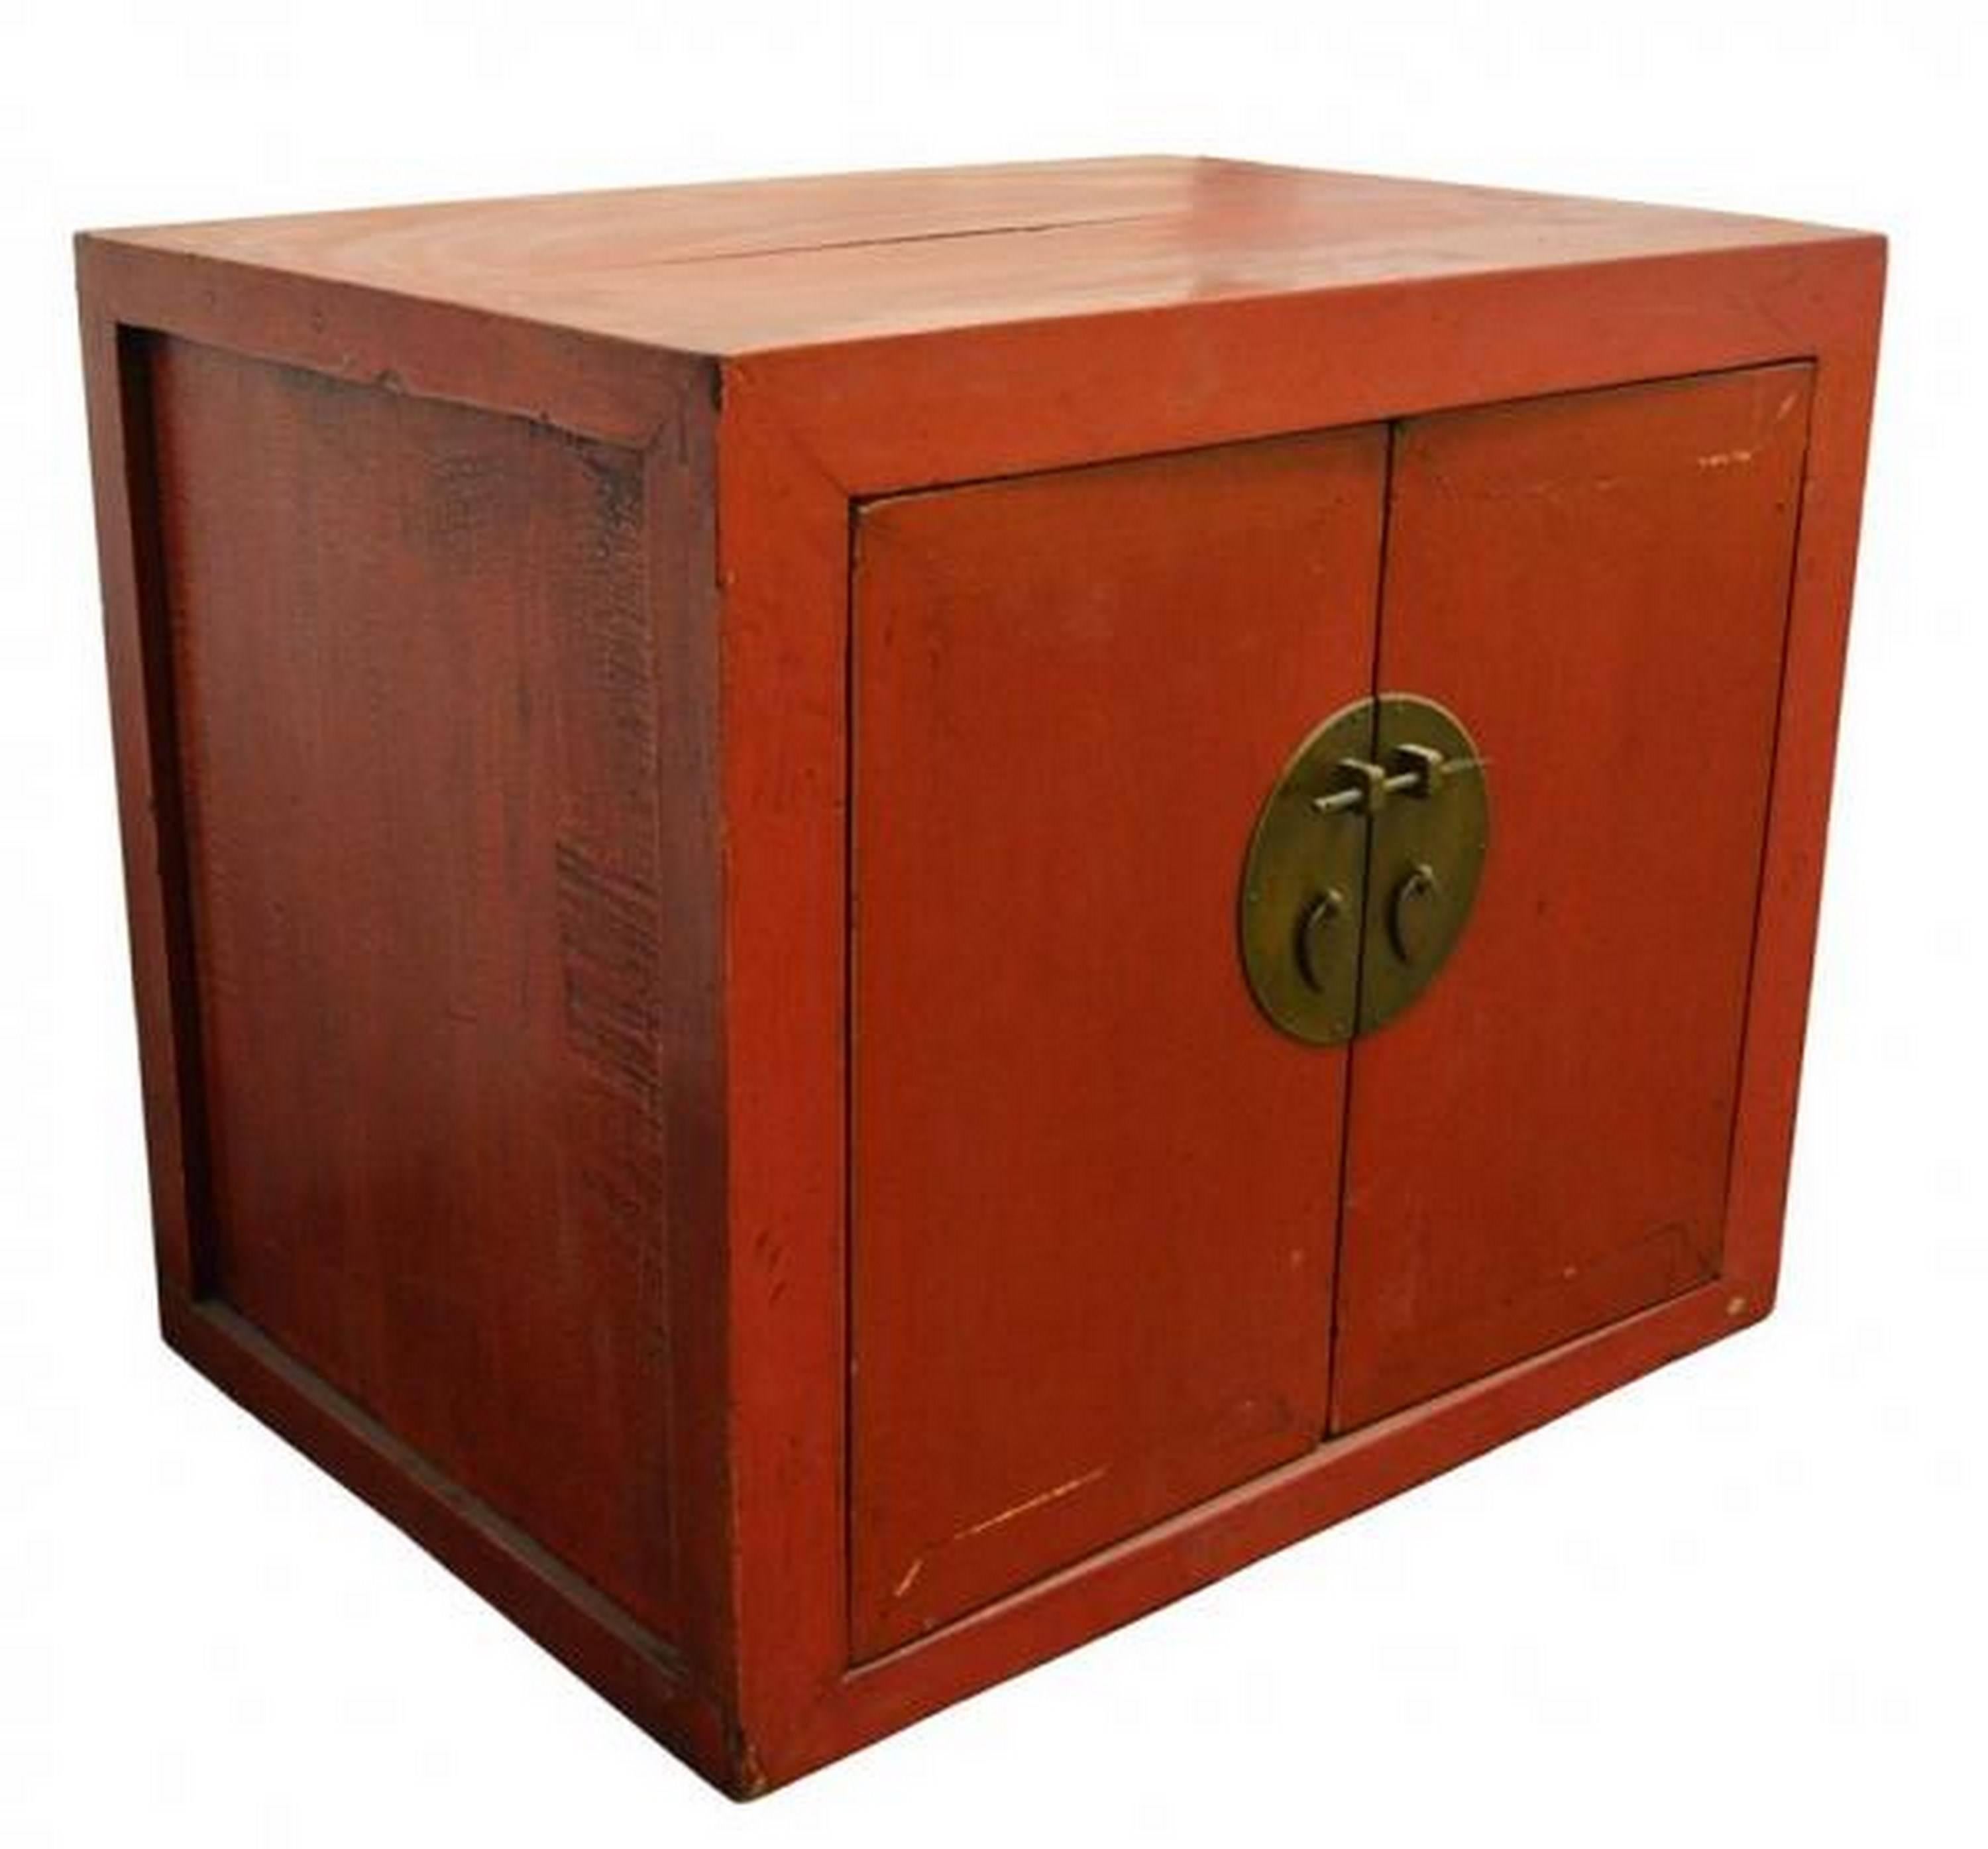 This beautiful 20th century Chinese lacquer cabinet is characteristic of the Chinese style of this period, thanks to its gorgeous red color and its elegant simplicity. The cubic shape of this cabinet is only livened up by the light recess of its